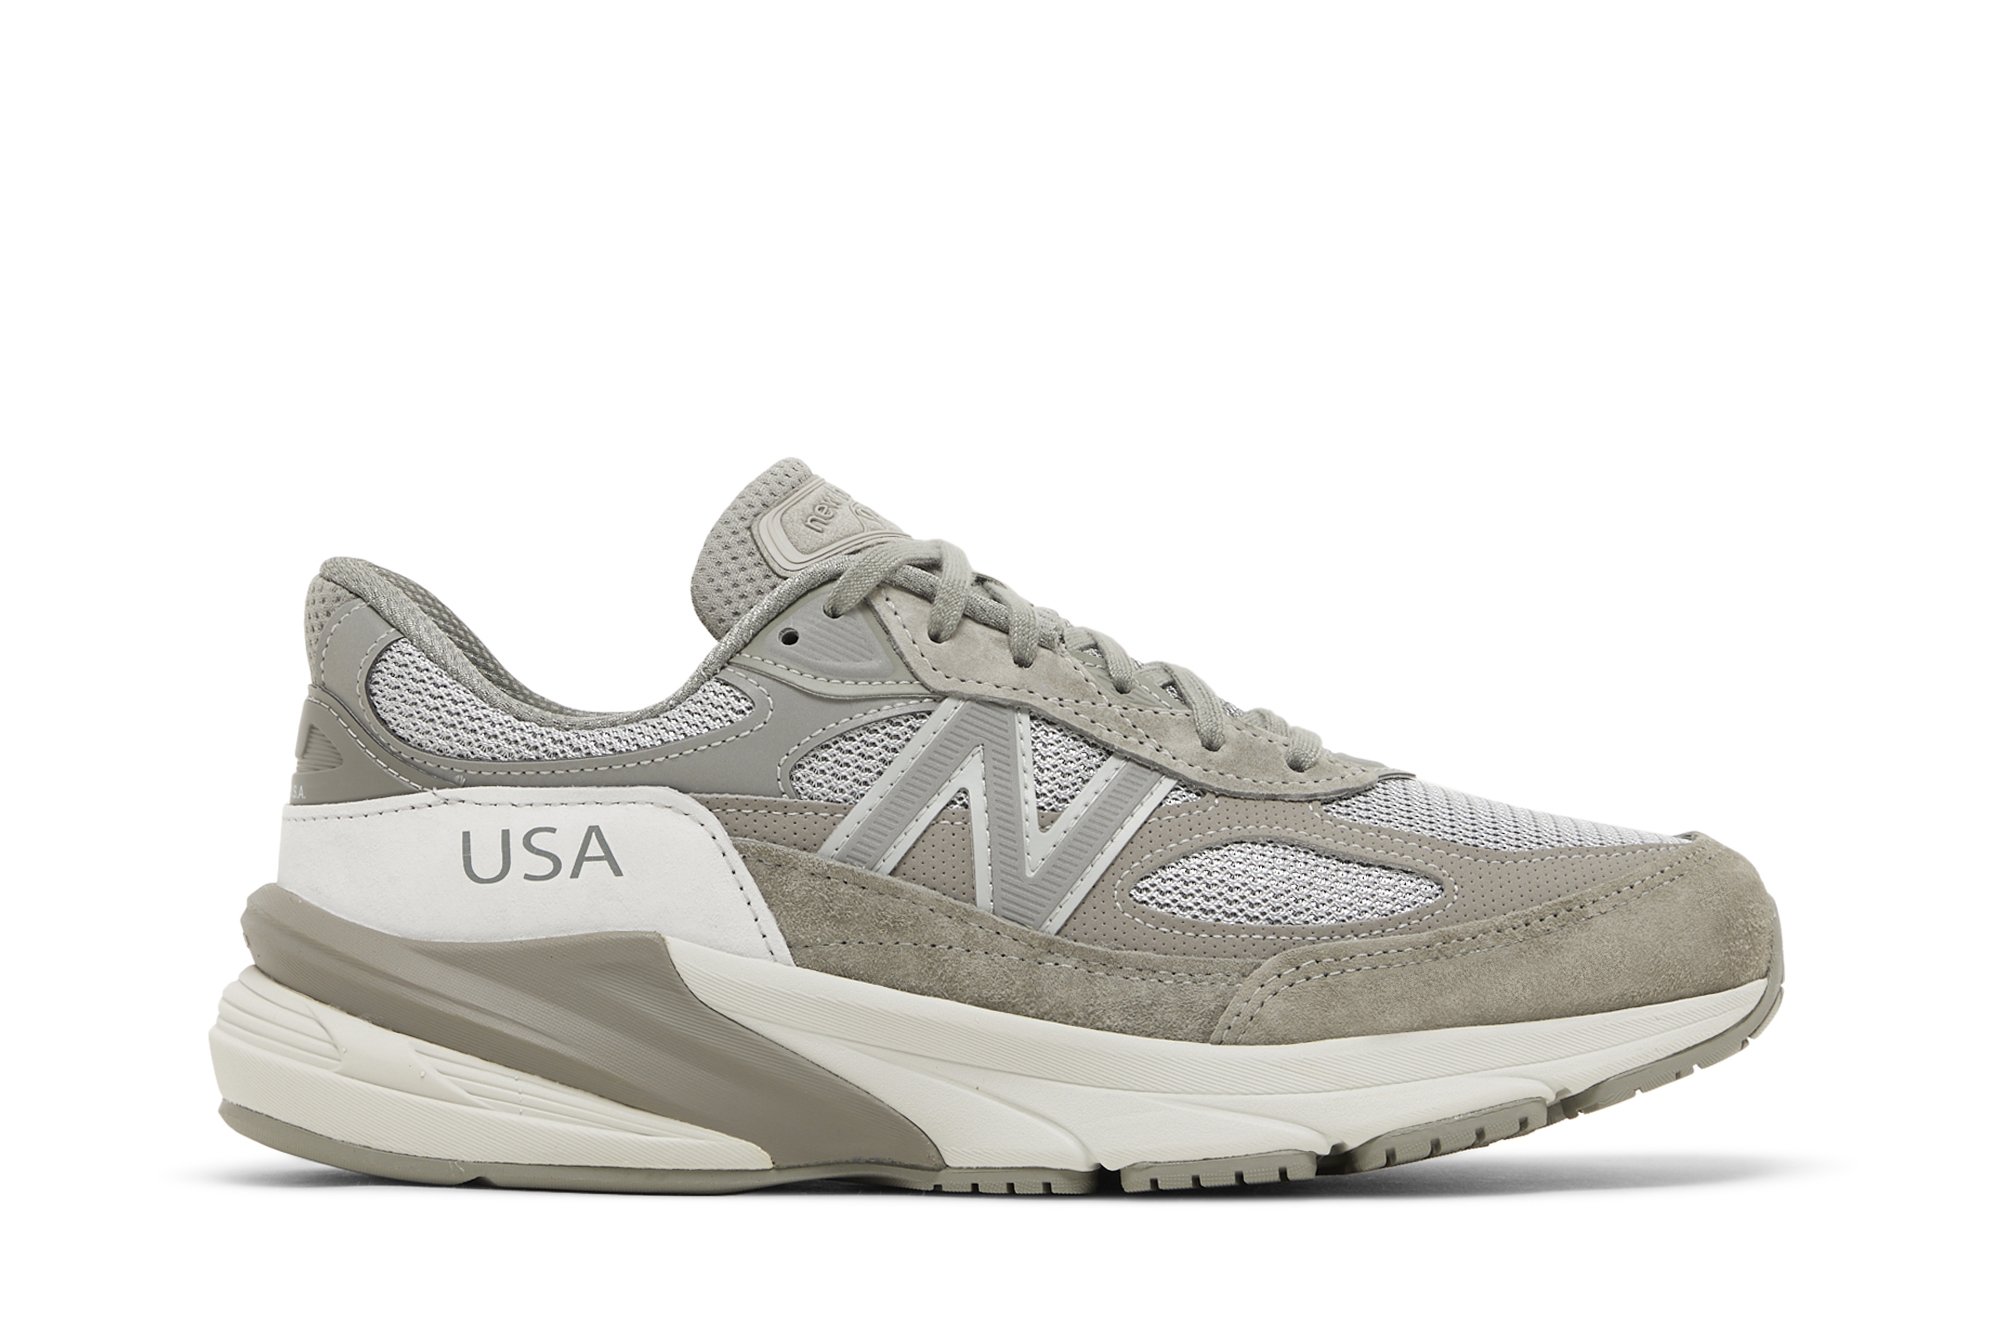 Buy WTAPS x 990v6 Made in USA 'Moon Mist' - M990WT6 - Grey | GOAT